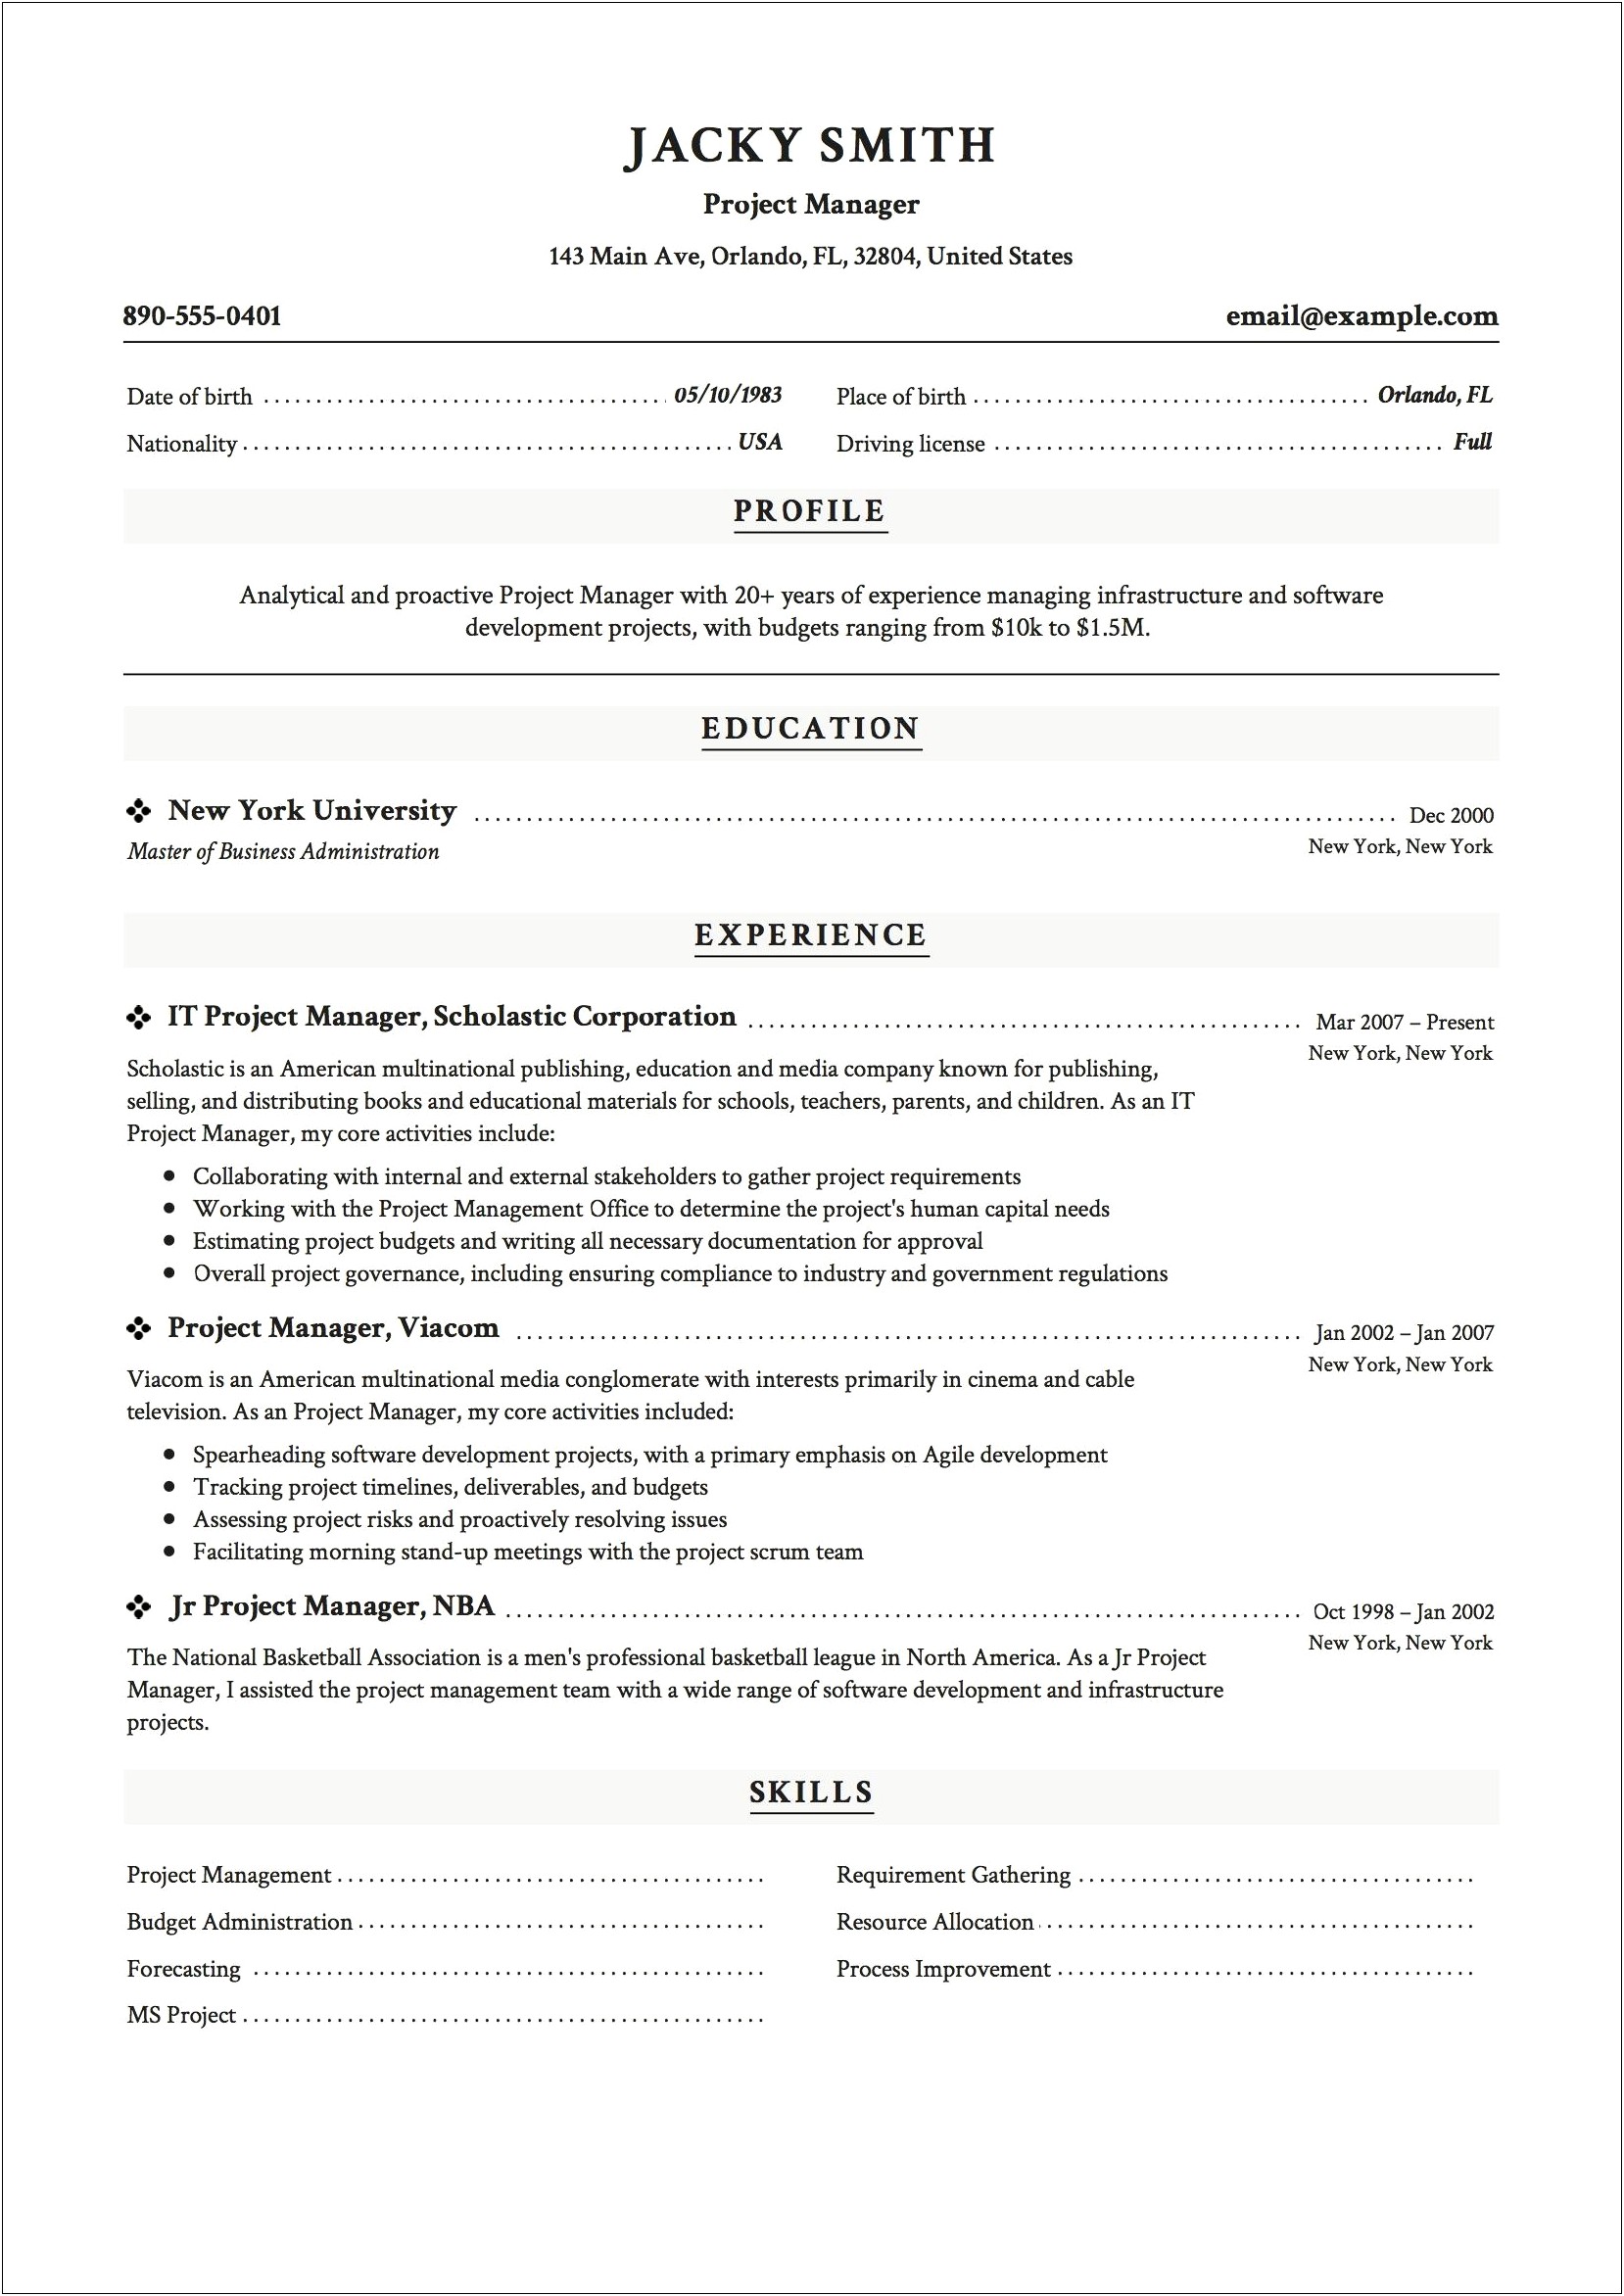 Best Resume Type For Construction Project Manager